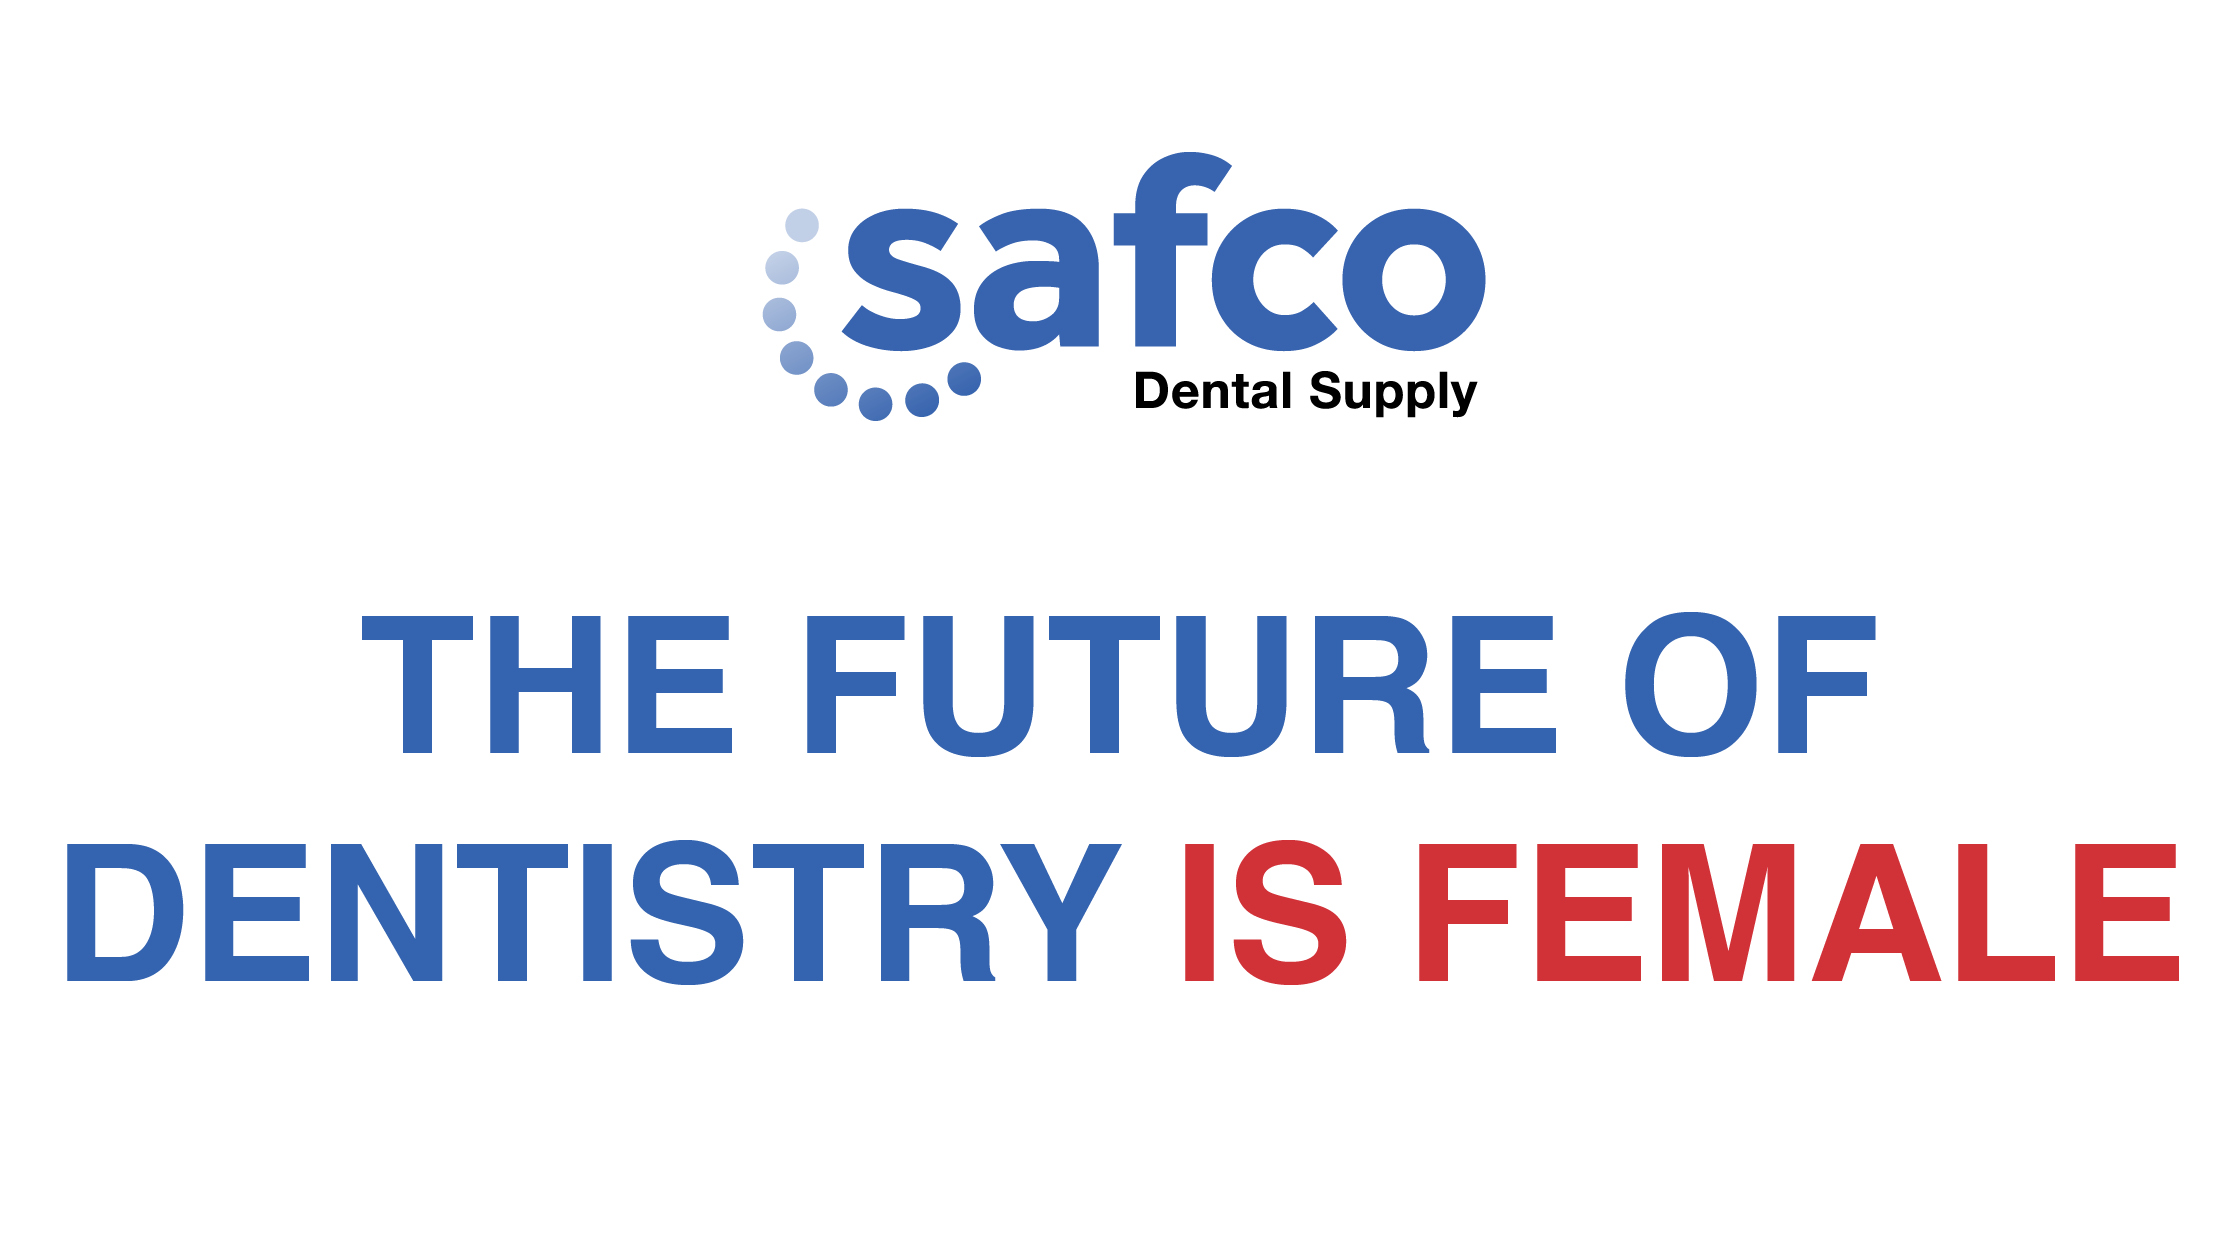 The Future of Dentistry is Female